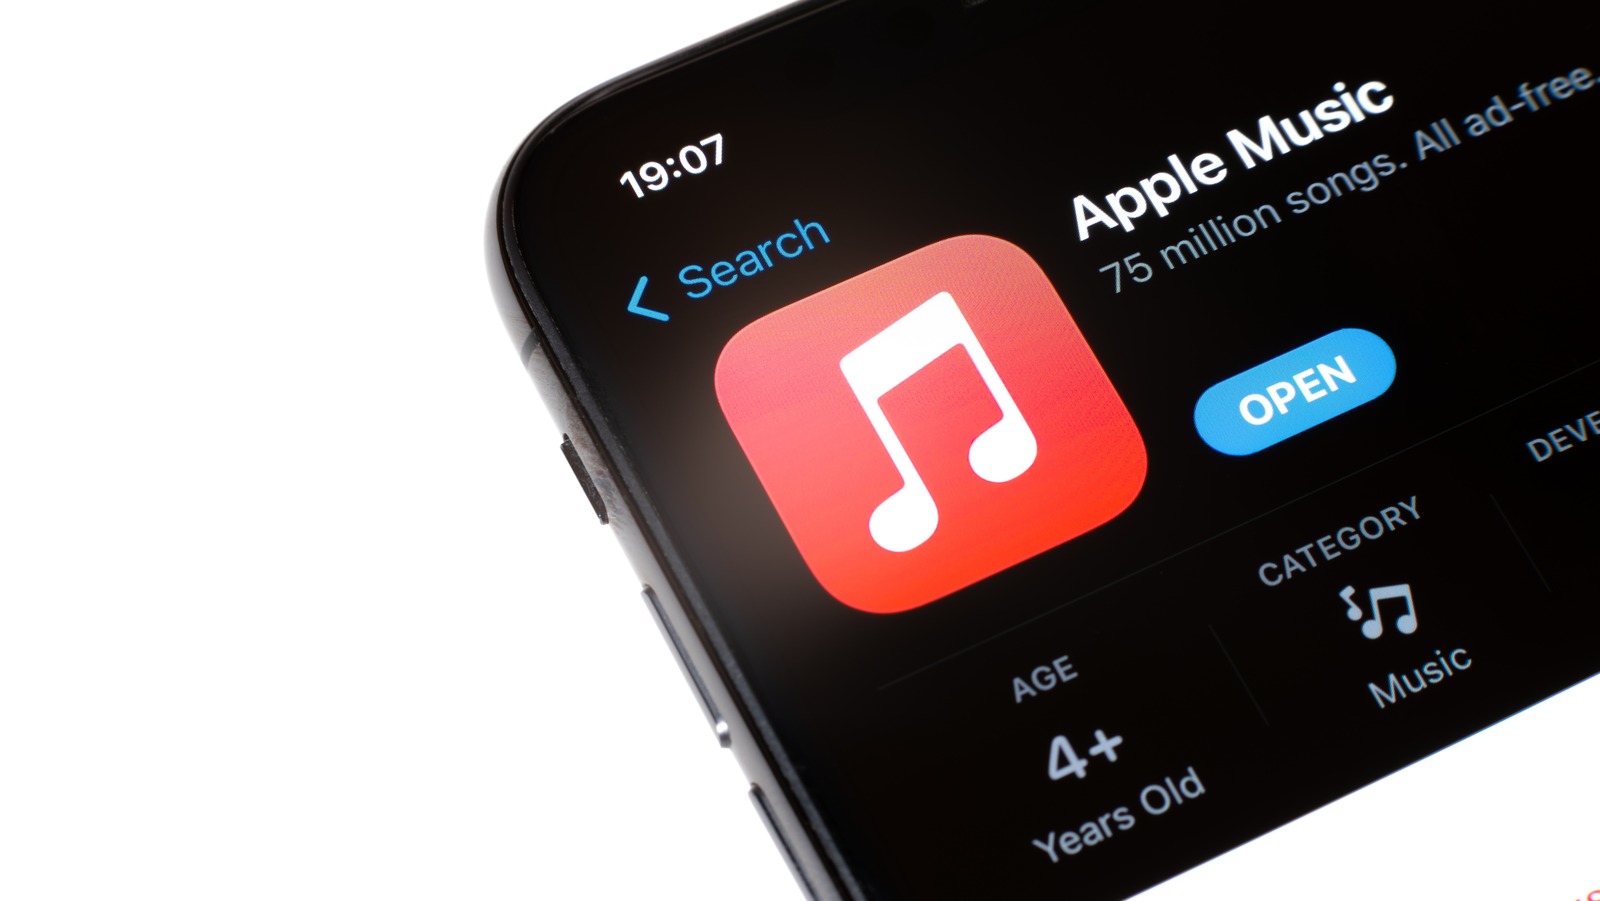 Apple Music Replay 2022 Is Now Live With A Fresh Redesign